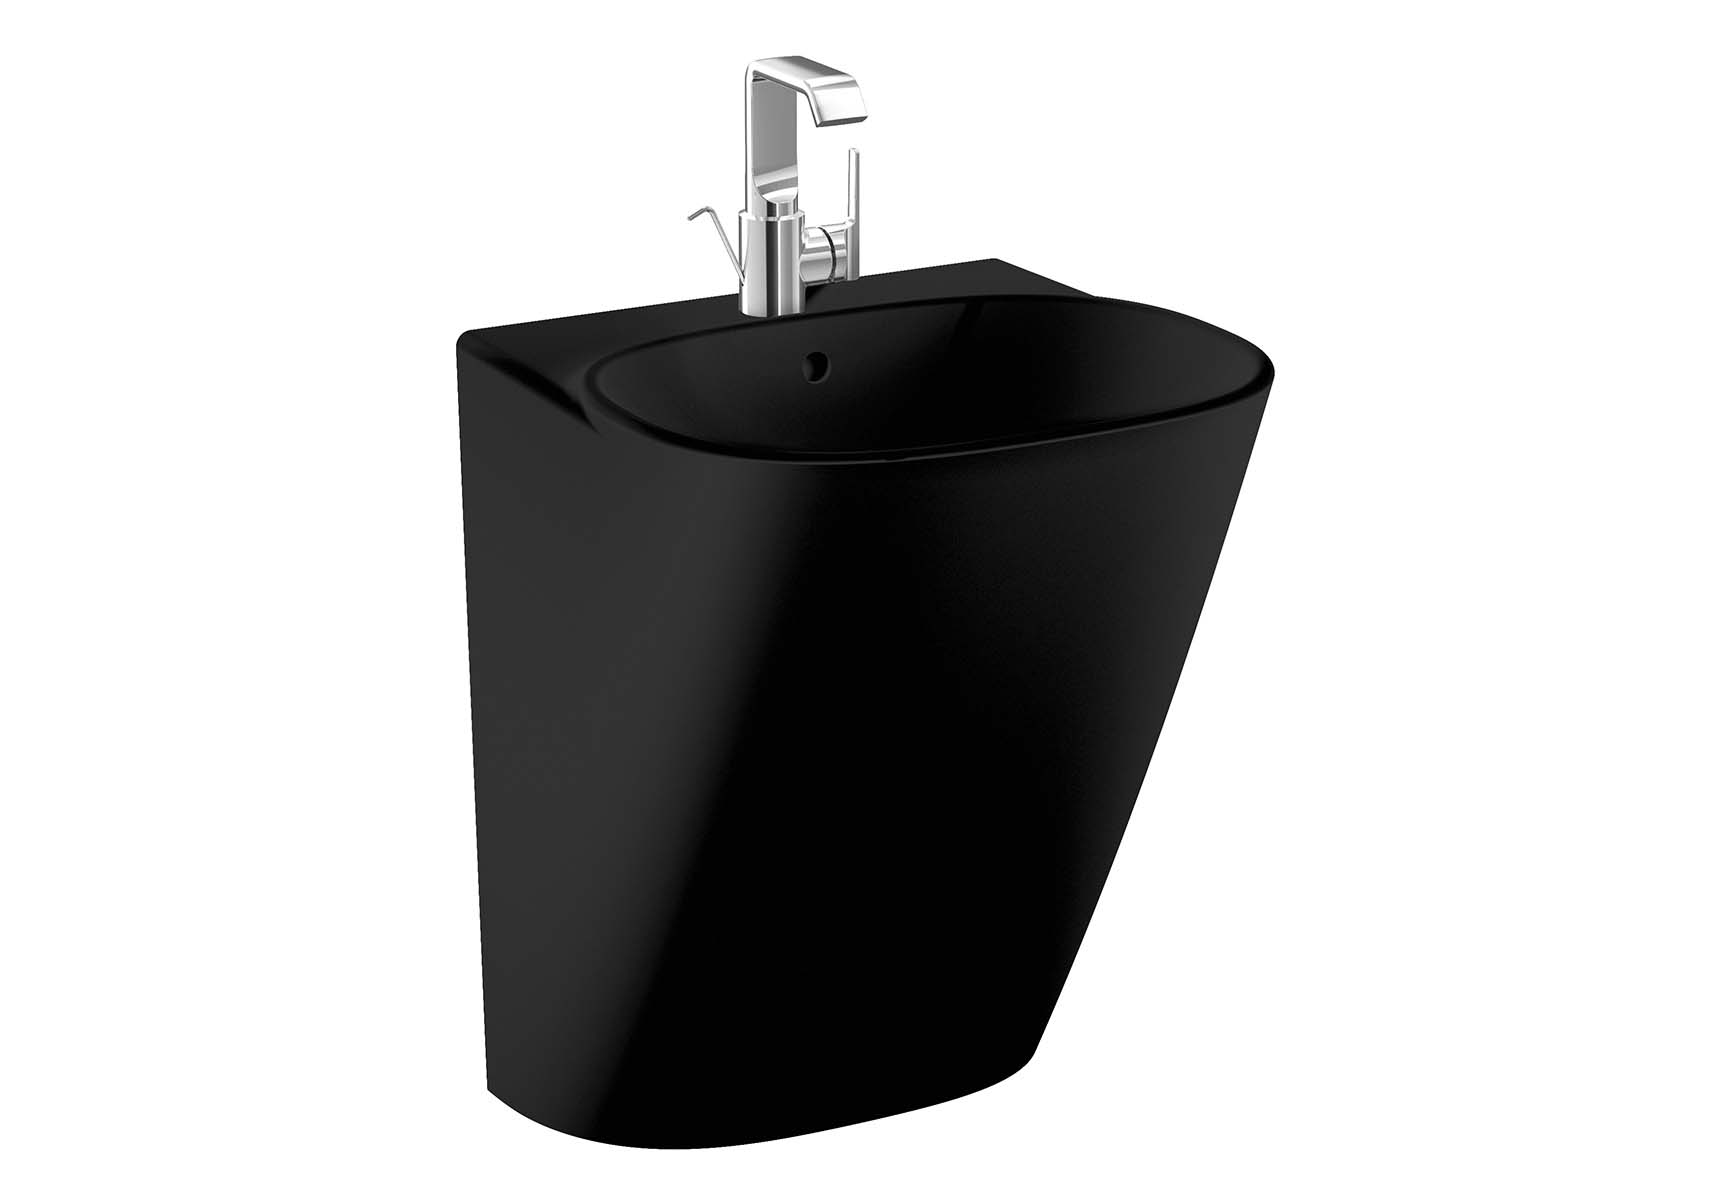 Frame Half monoblock basin, 50 cm, with one tap hole, with overflow hole, black, 424216 waste set and trap is included